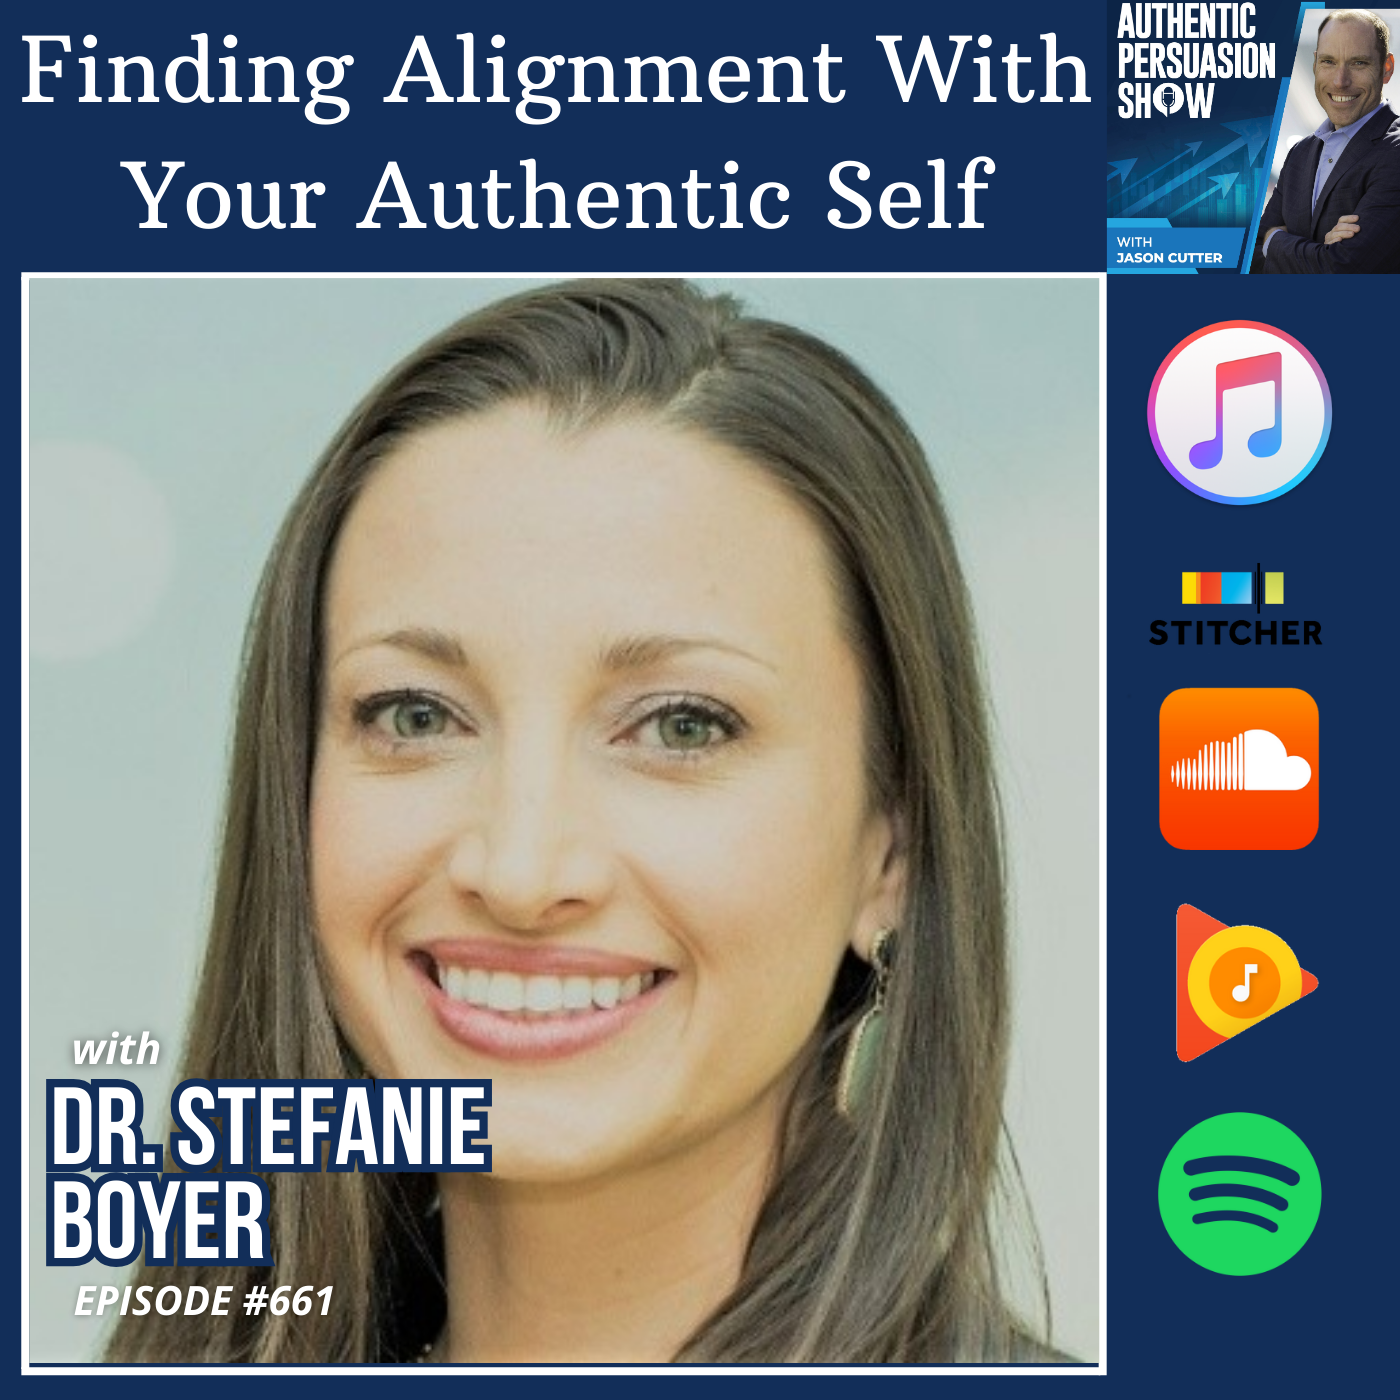 [661] Finding Alignment With Your Authentic Self, with Dr. Stefanie Boyer from Bryant University